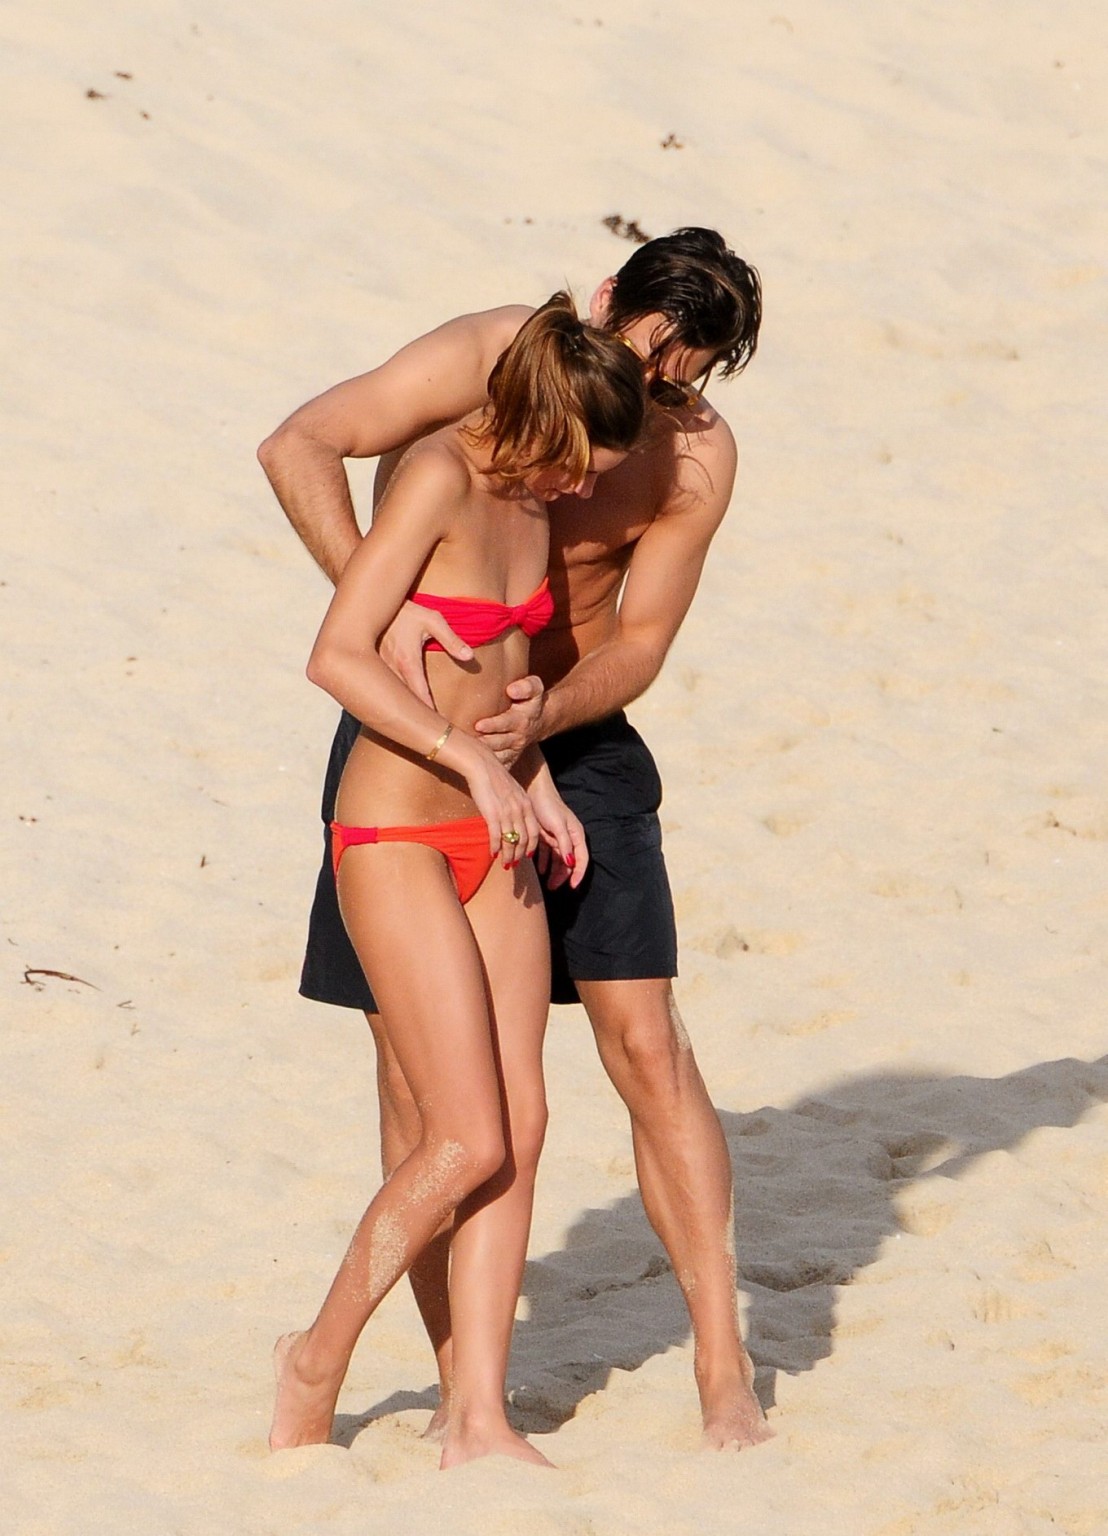 Olivia Palermo in bikini making out with her boyfriend on a beach in St. Barts #75277969